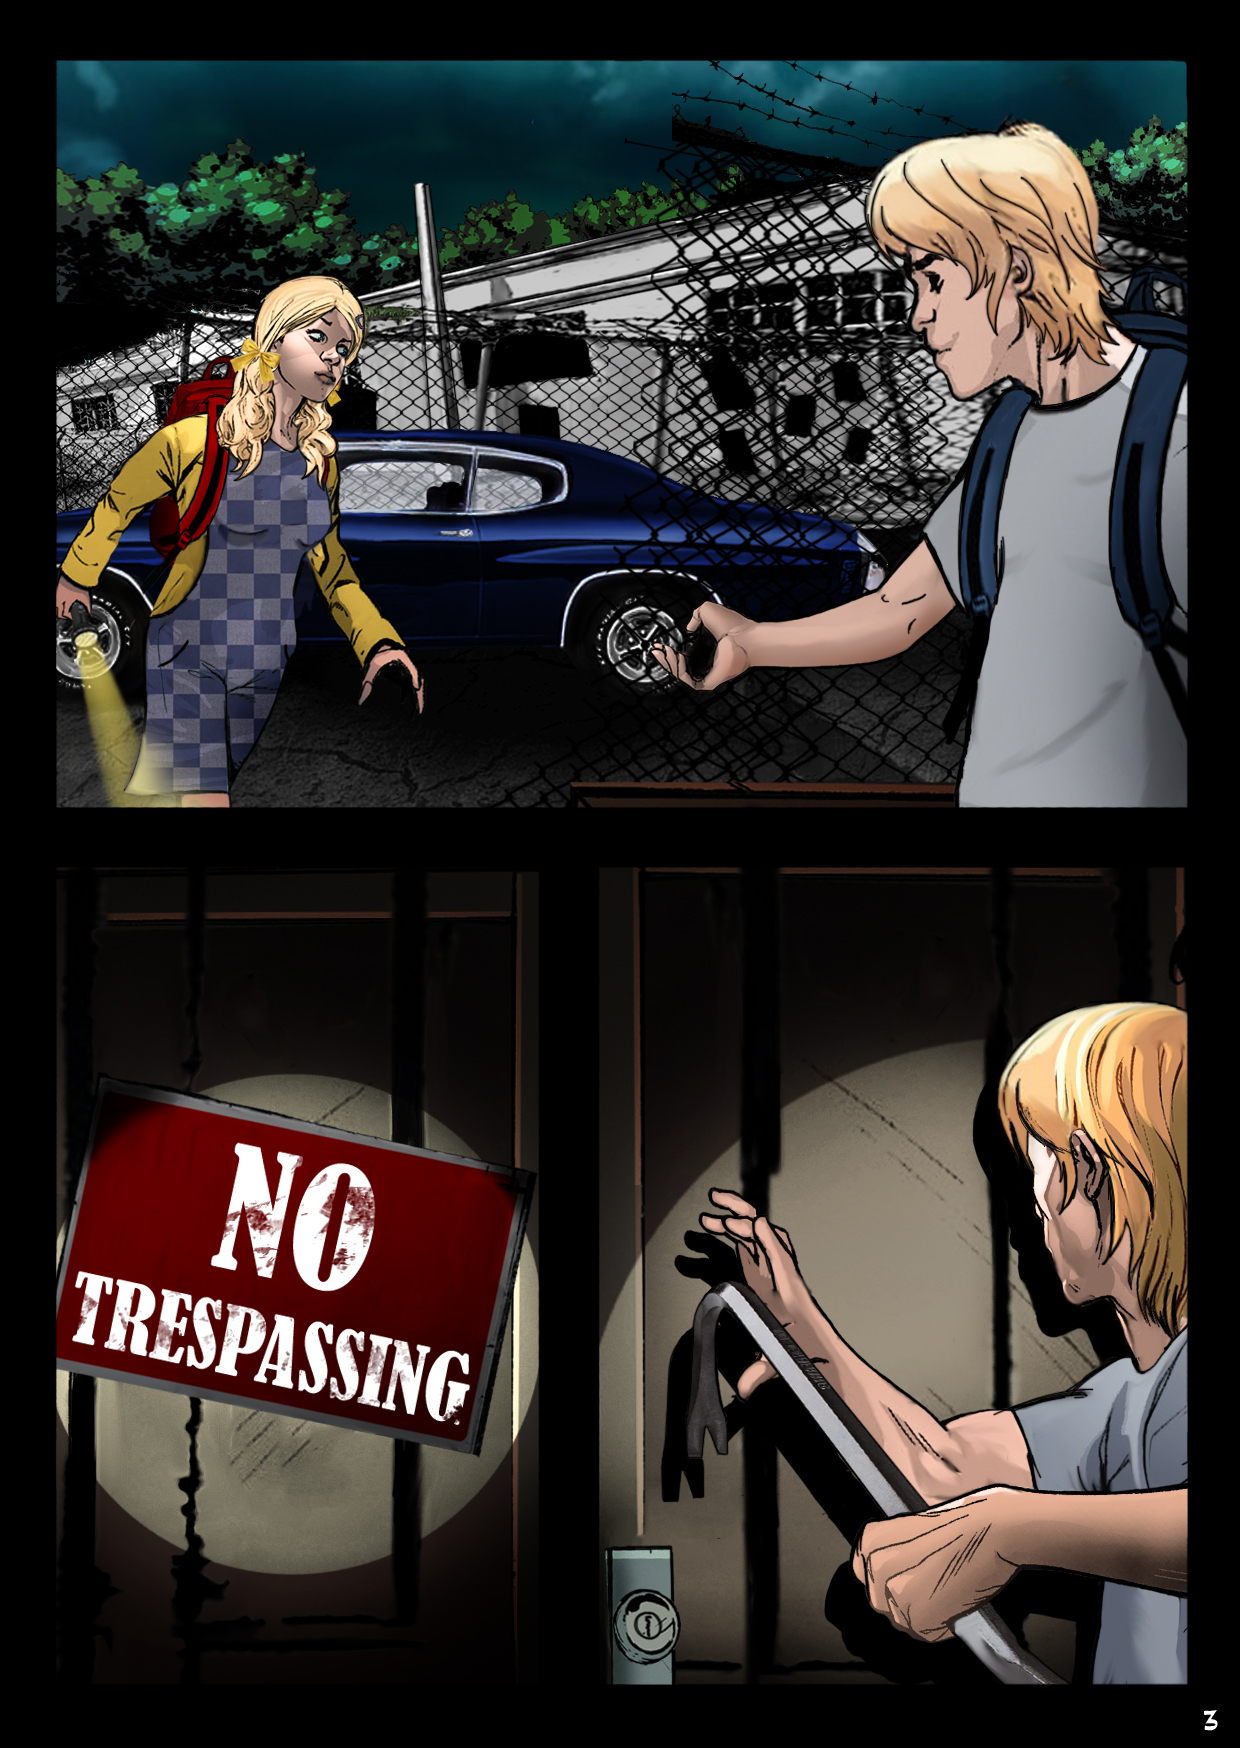 No Trespassing signs are meaningless to teenagers on an assignation.